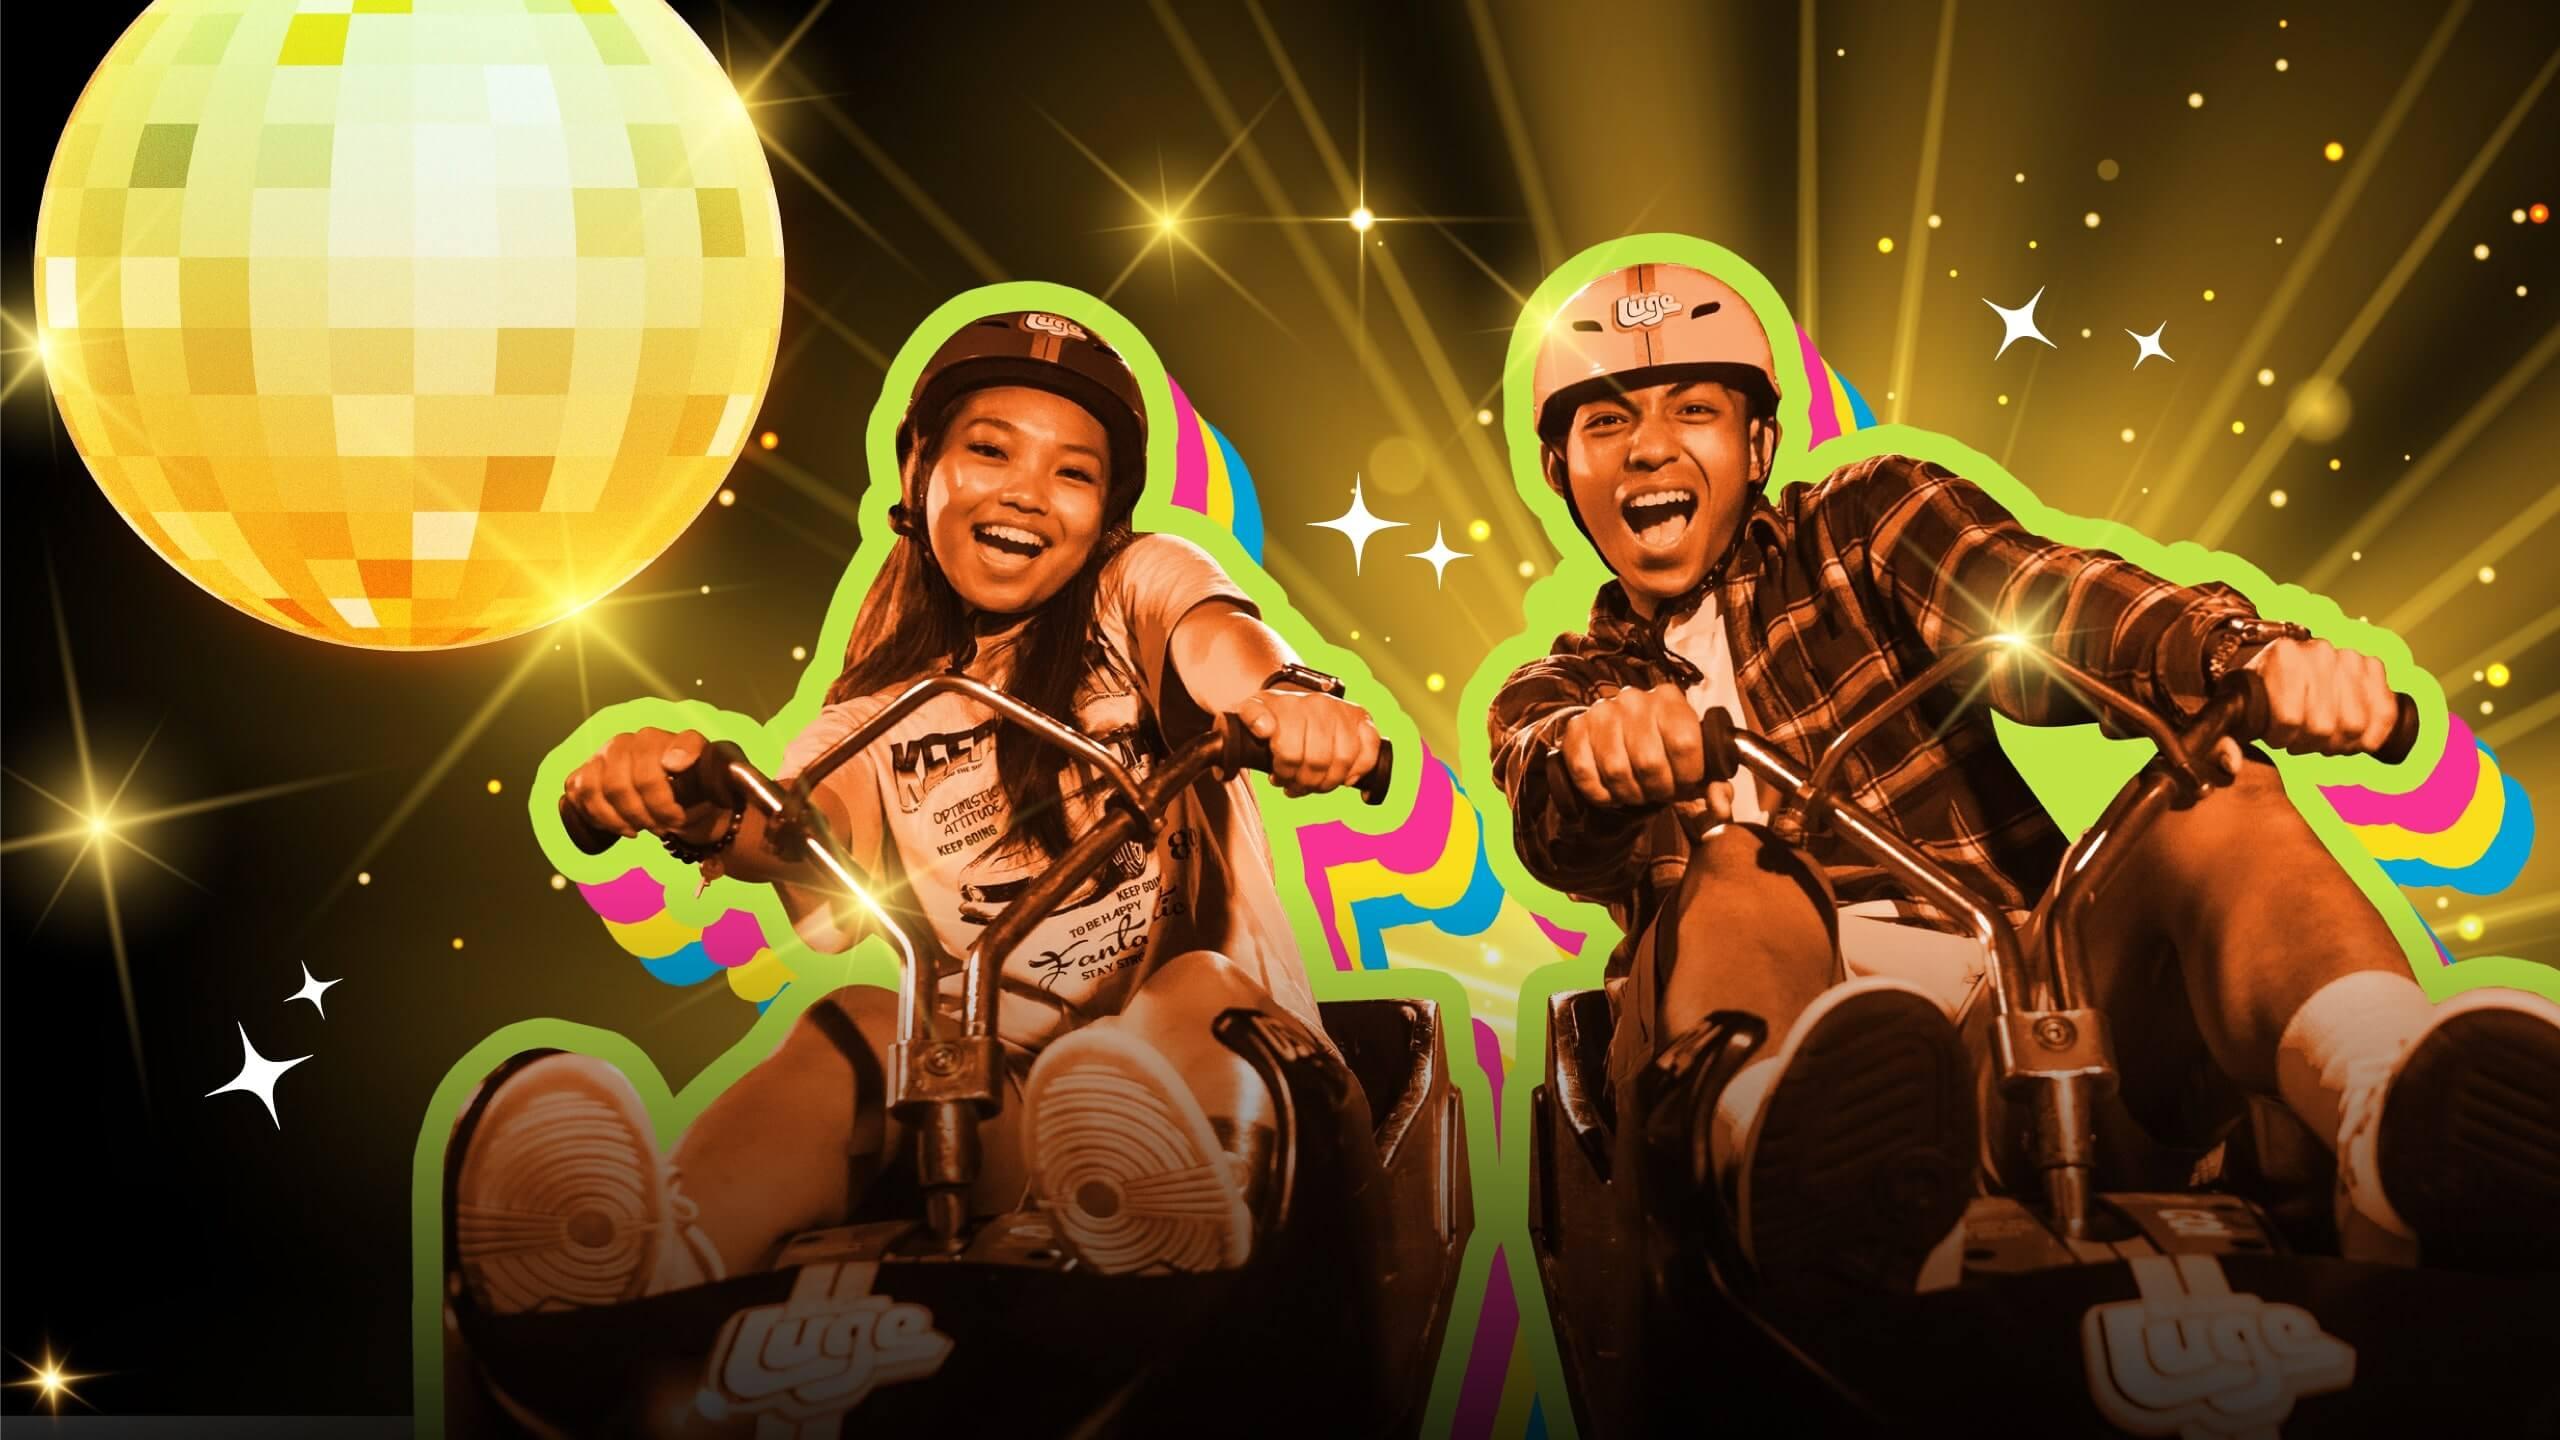 A couple rides next to each other with a disco ball and colourful lights animated behind them.